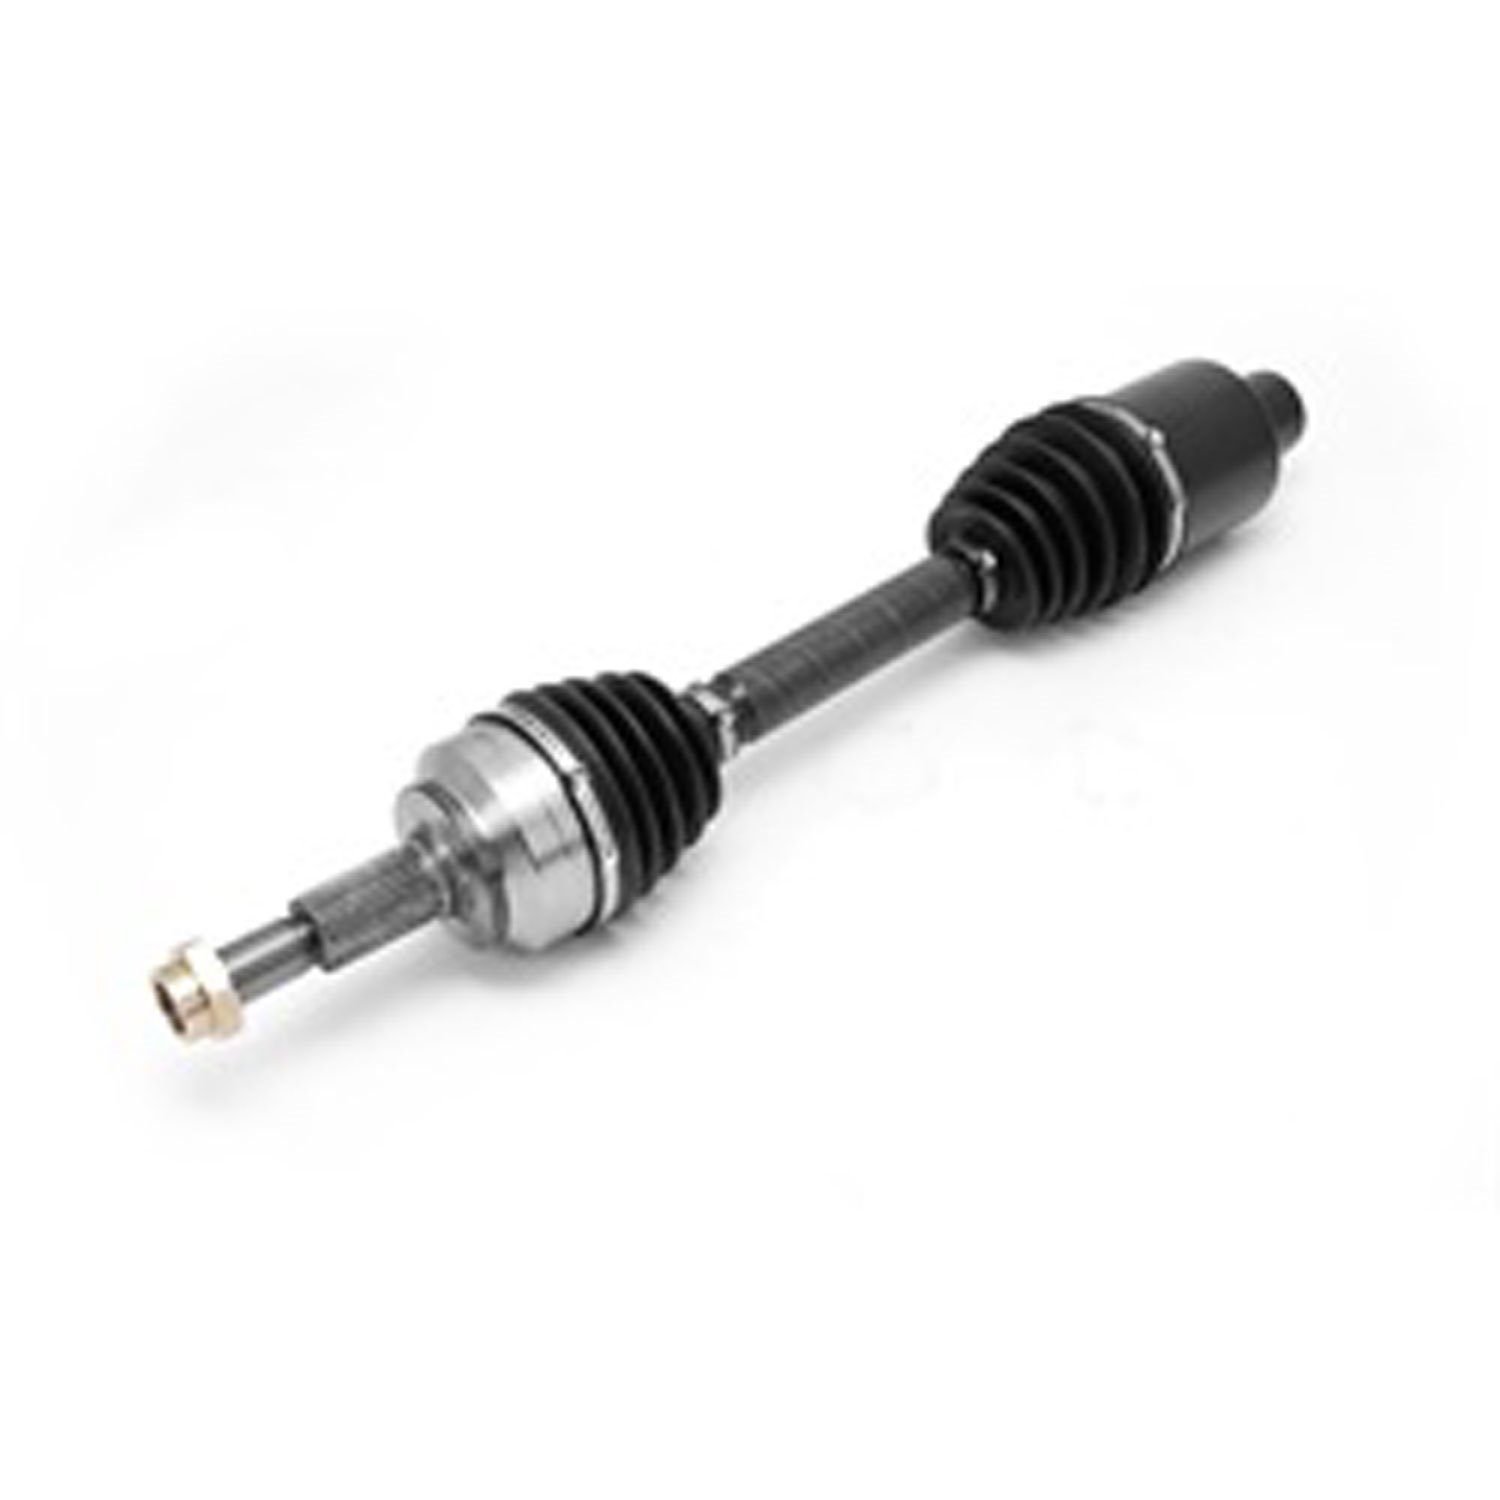 Replacement front CV axle shaft for Super Dana